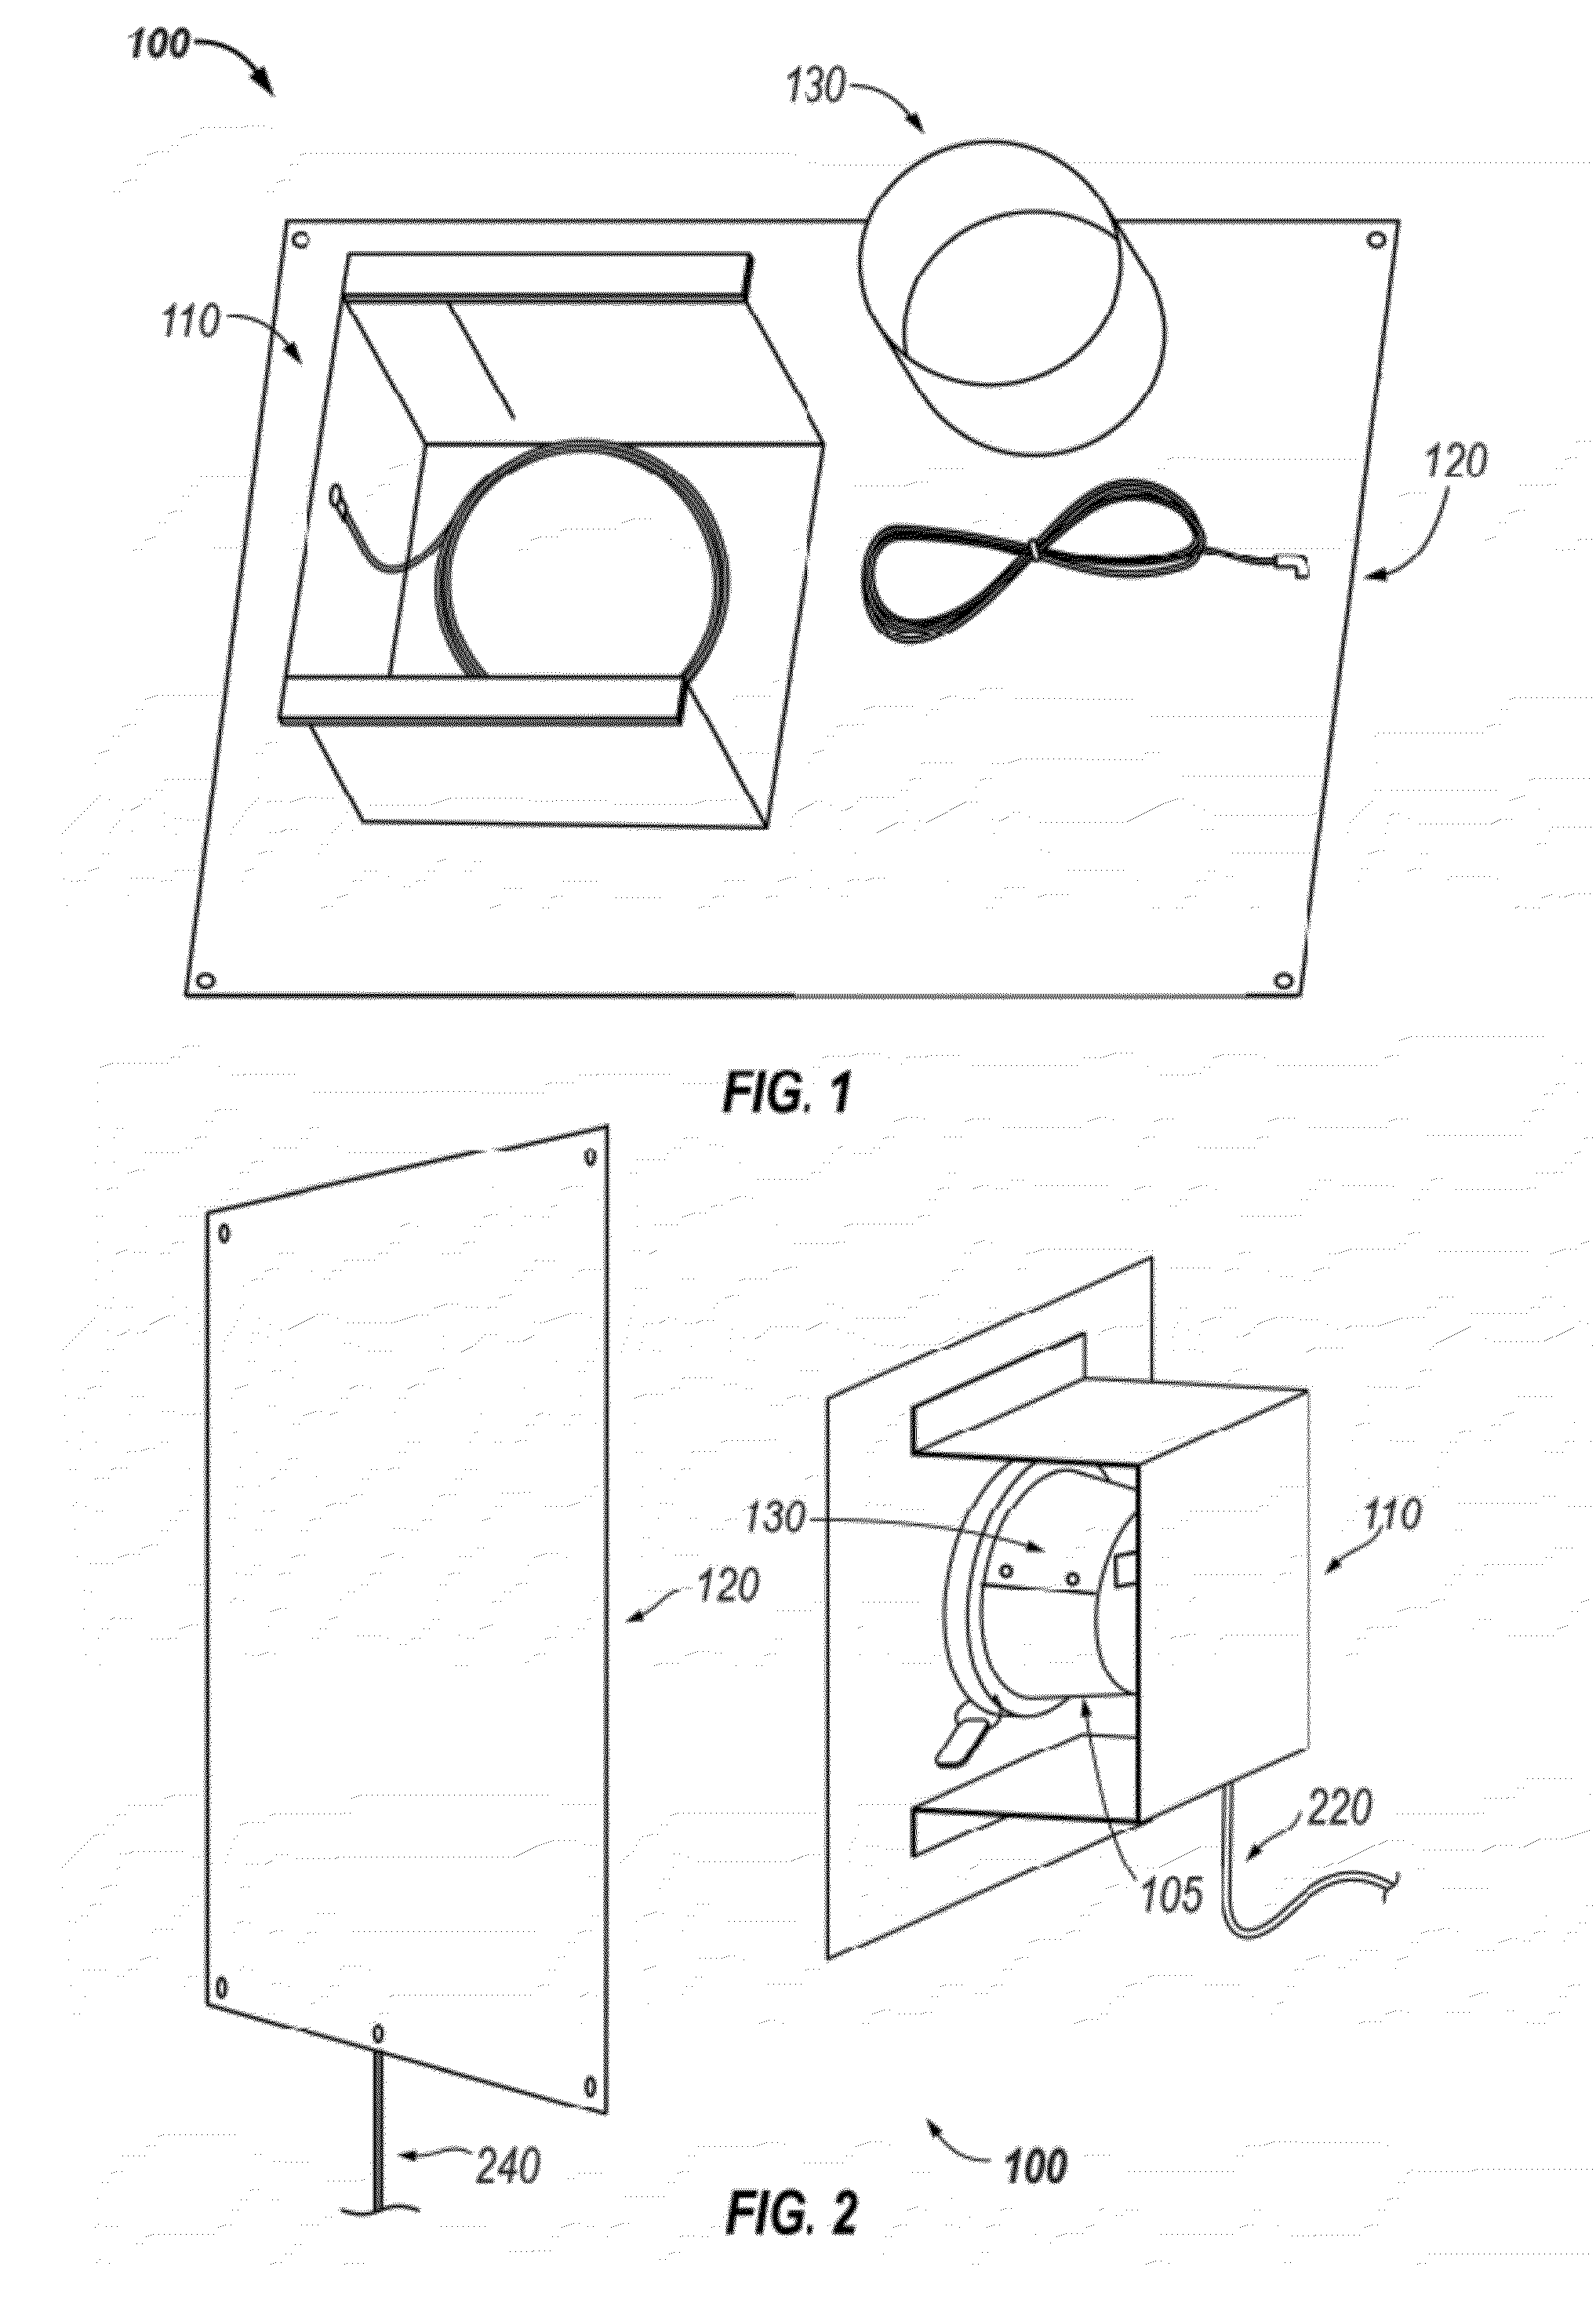 Smart meter protection system and methods